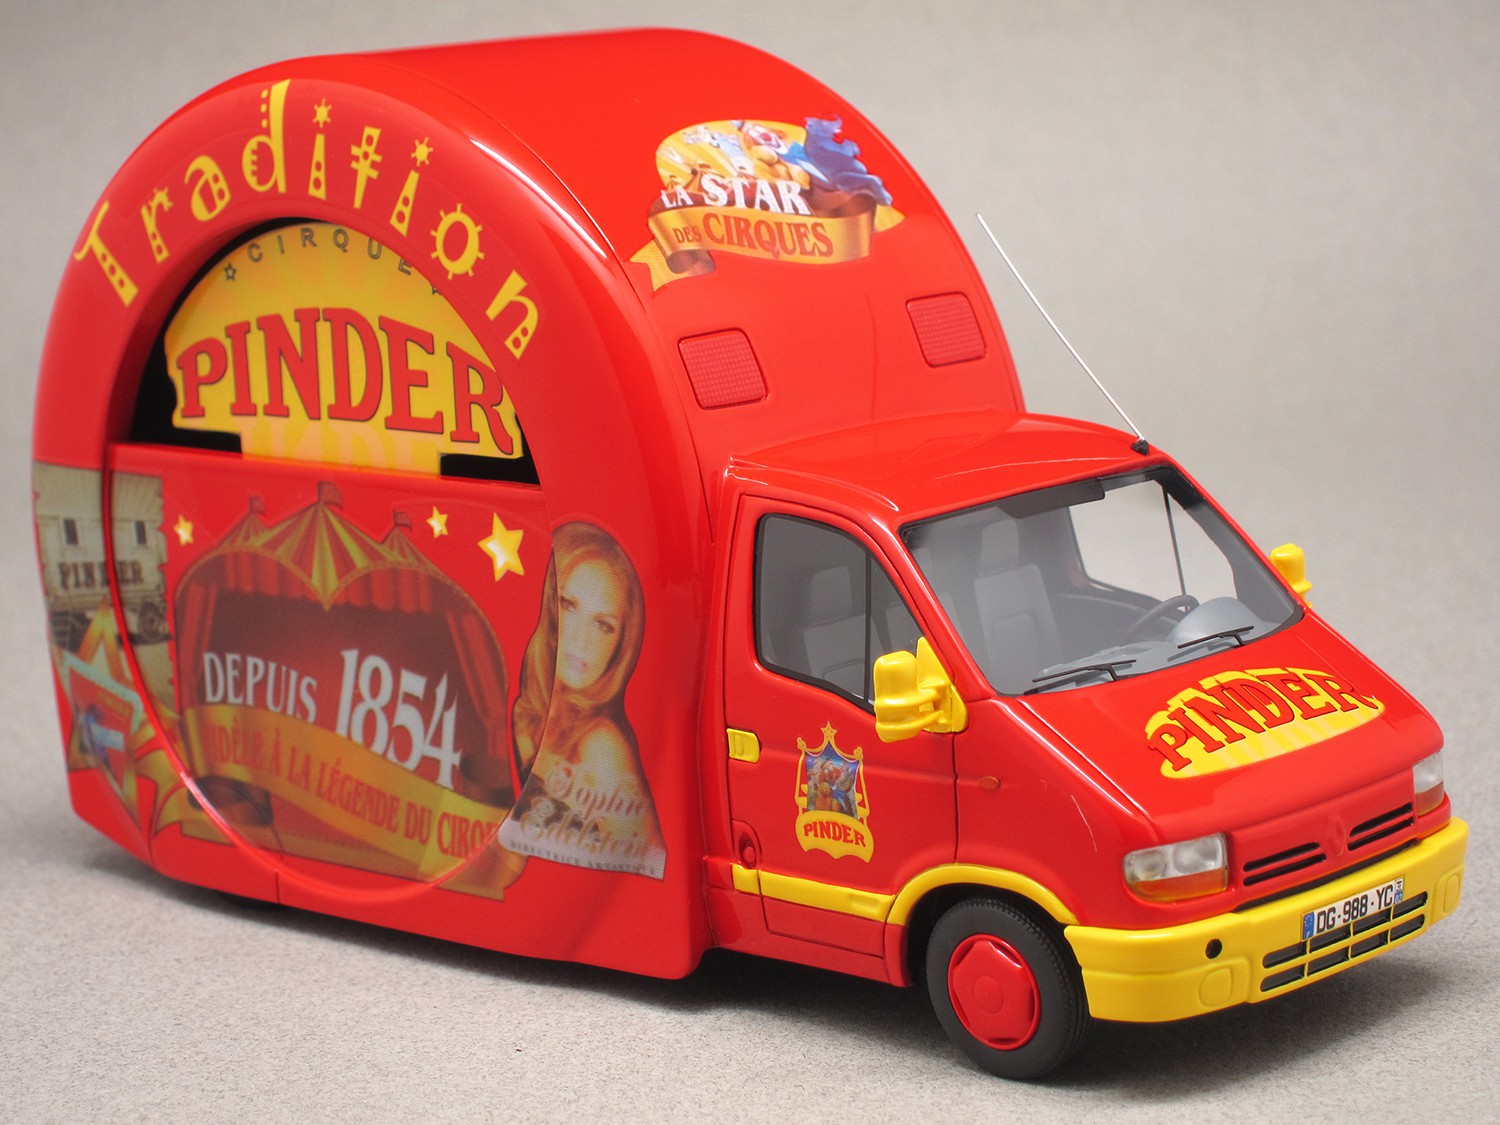 Renault Master 1997 Pinder "Tradition" (Perfex) 1/43e